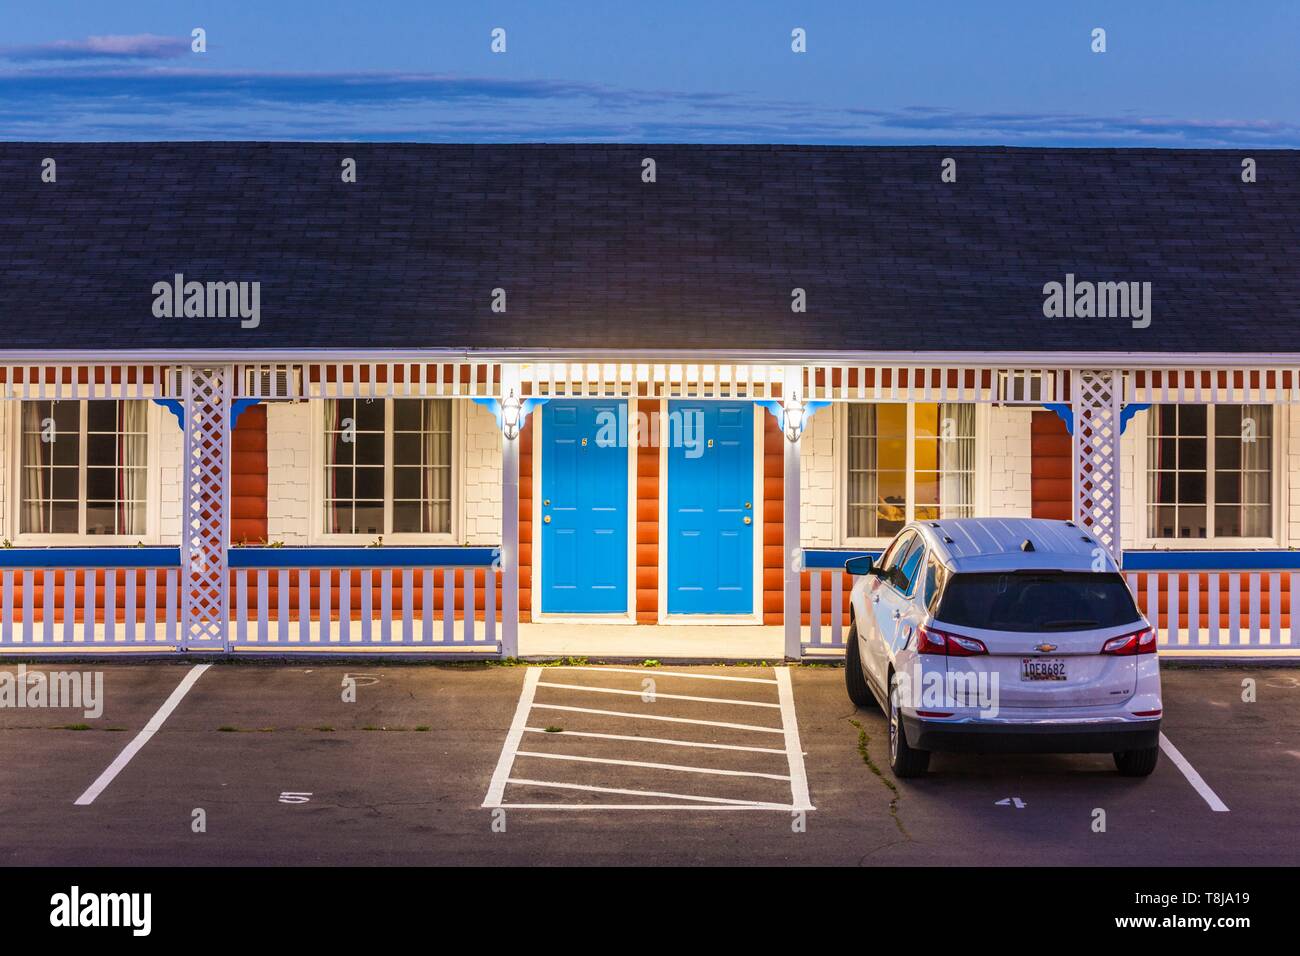 Canada, New Brunswick, Bay of Fundy, Lower Cape, colorful motel Stock Photo